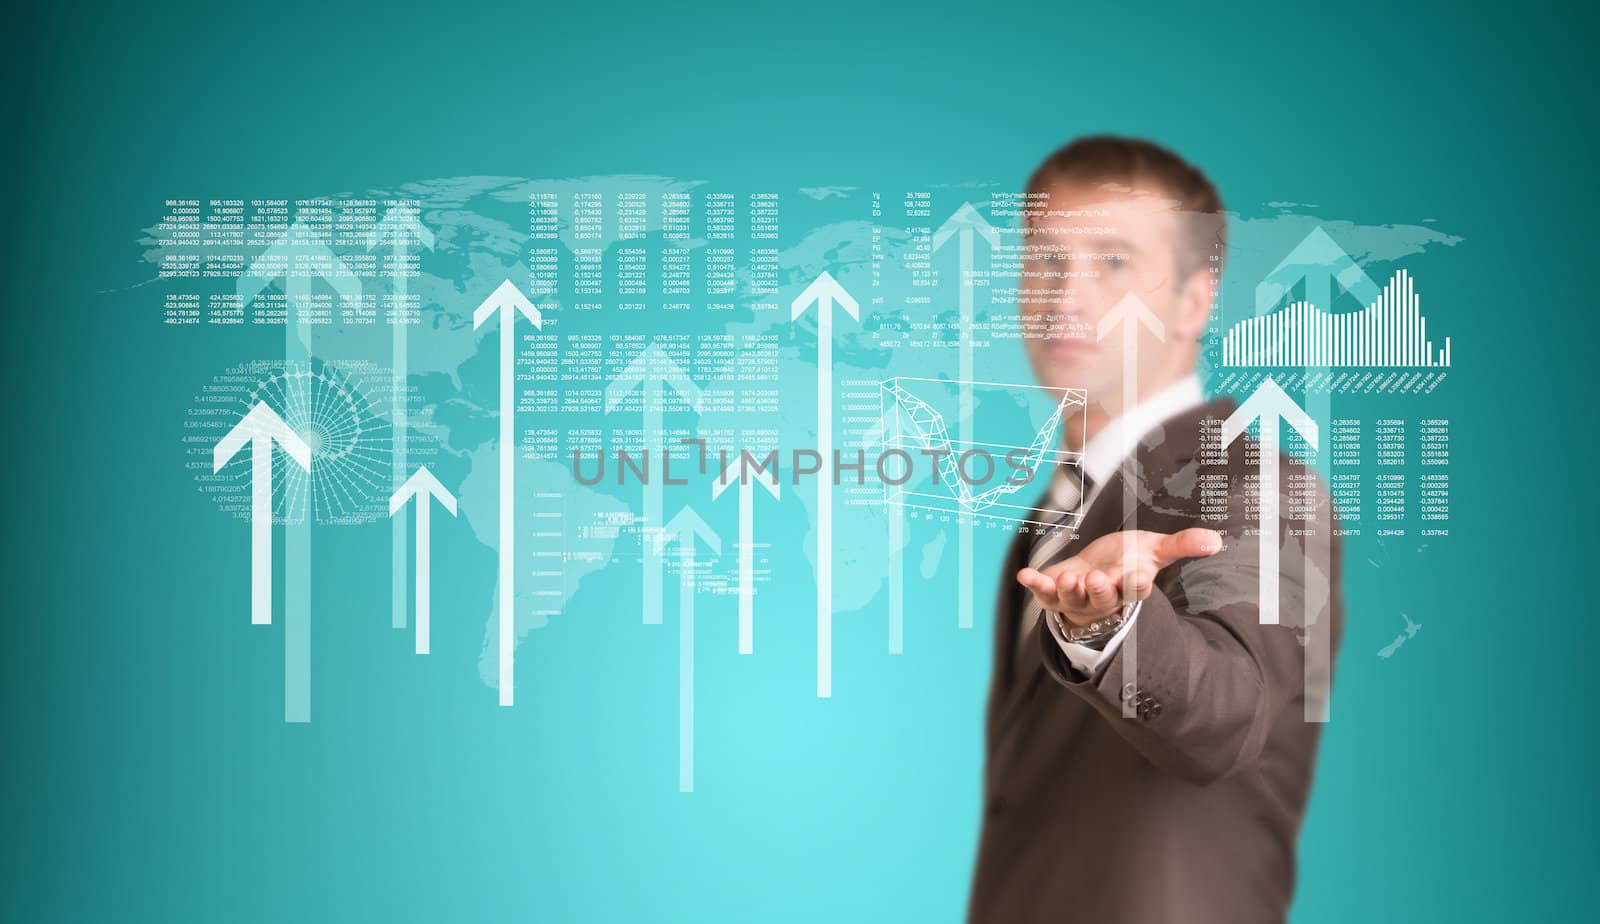 Businessman with graphs and arrows. Business concept